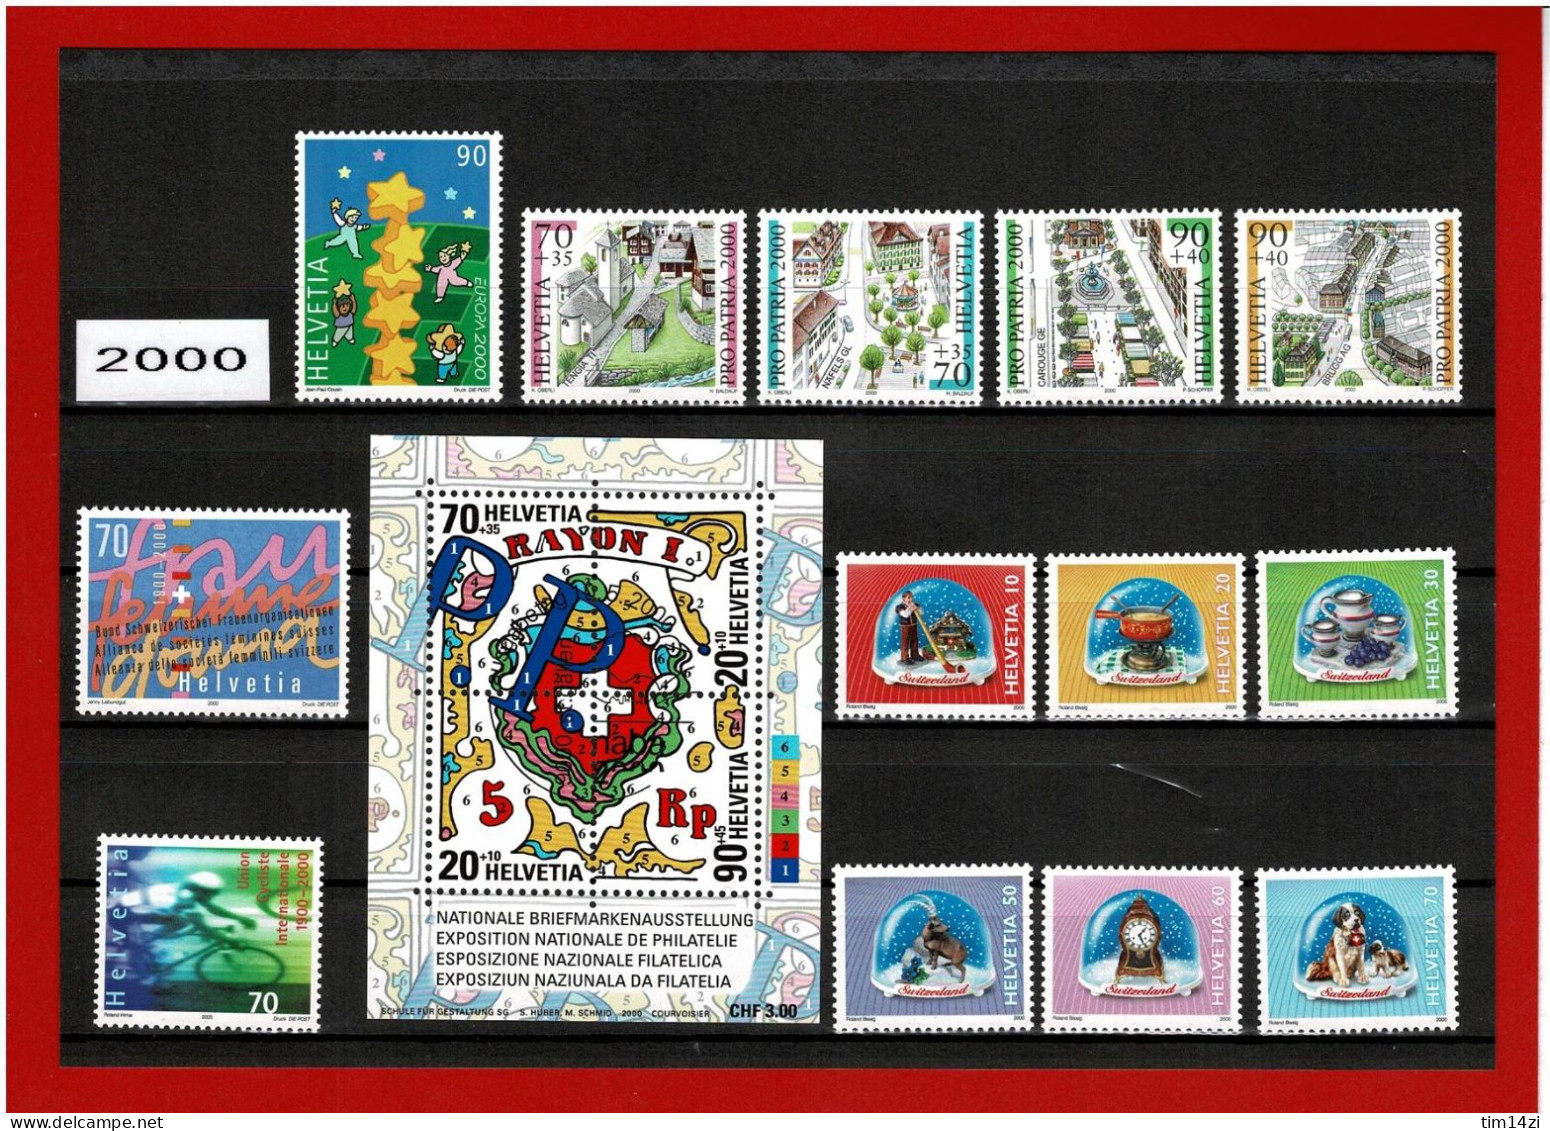 SUISSE - 1637/1670 - TIMBRES NEUFS**- ANNEE COMPLETE 2000 -  COTE Y&T 2021 : 94.00 € - Nuevos